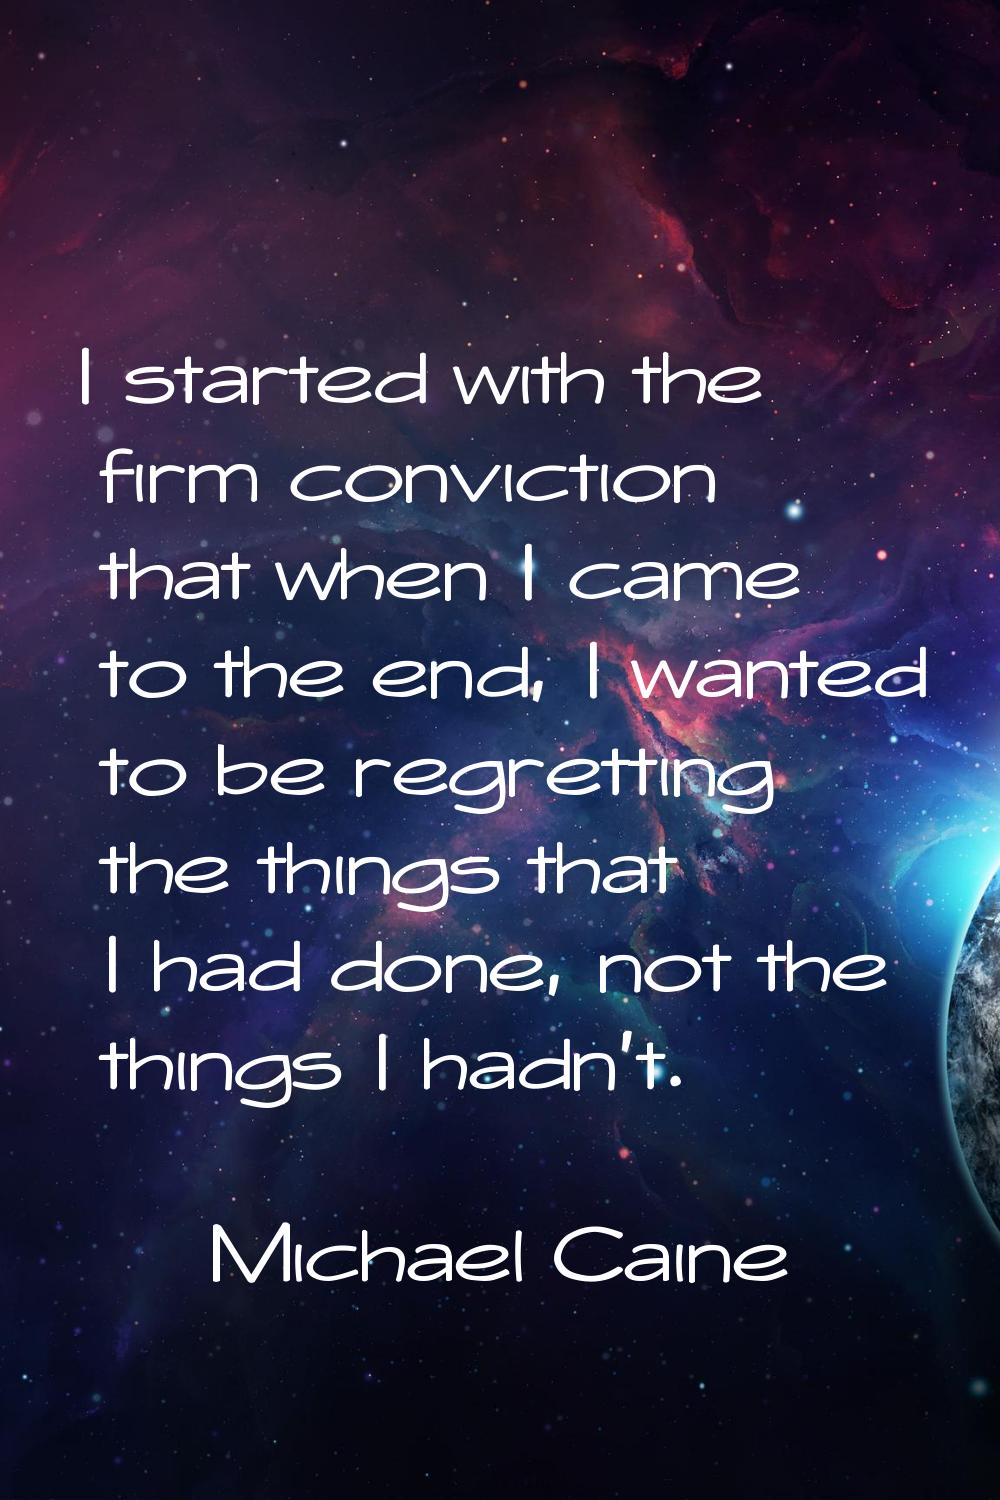 I started with the firm conviction that when I came to the end, I wanted to be regretting the thing